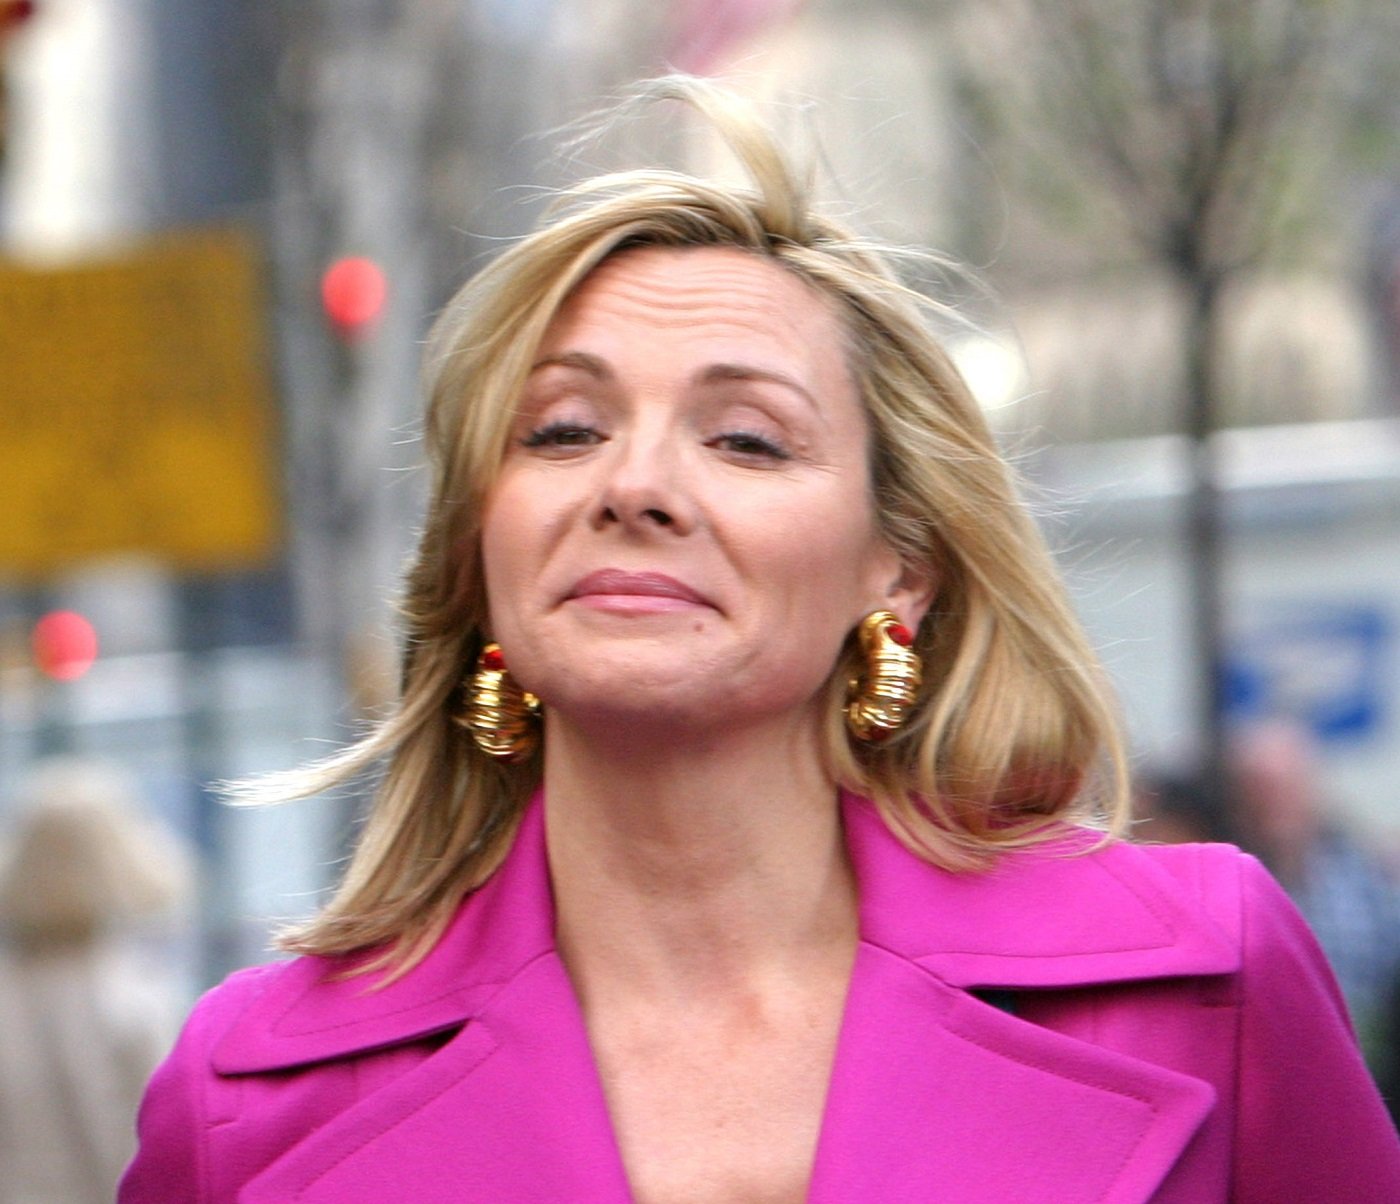 Kim Cattrall as Samantha Jones is seen on Location during the filming of season 4 of 'Sex and the City'